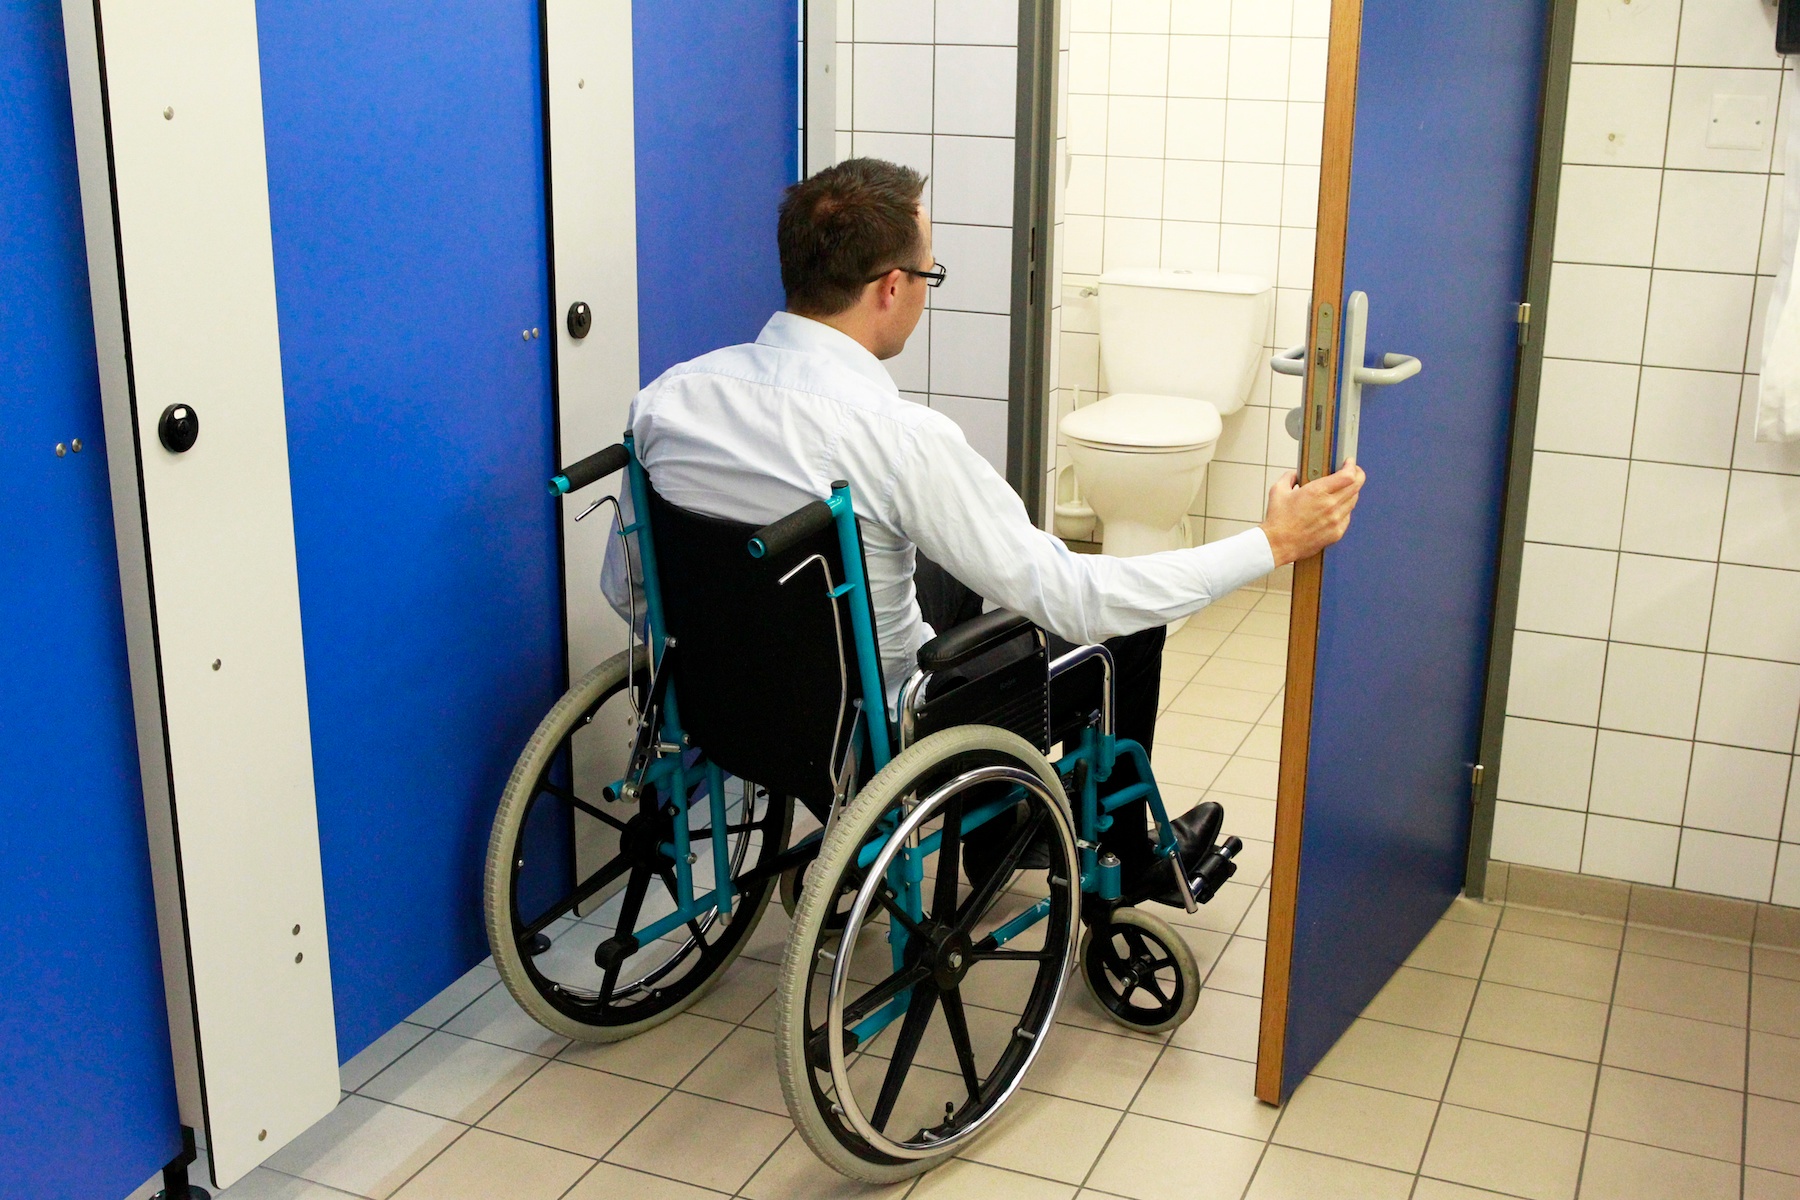 Male in wheelchair in restroom with bowel and bladder issues due to a spinal cord injury